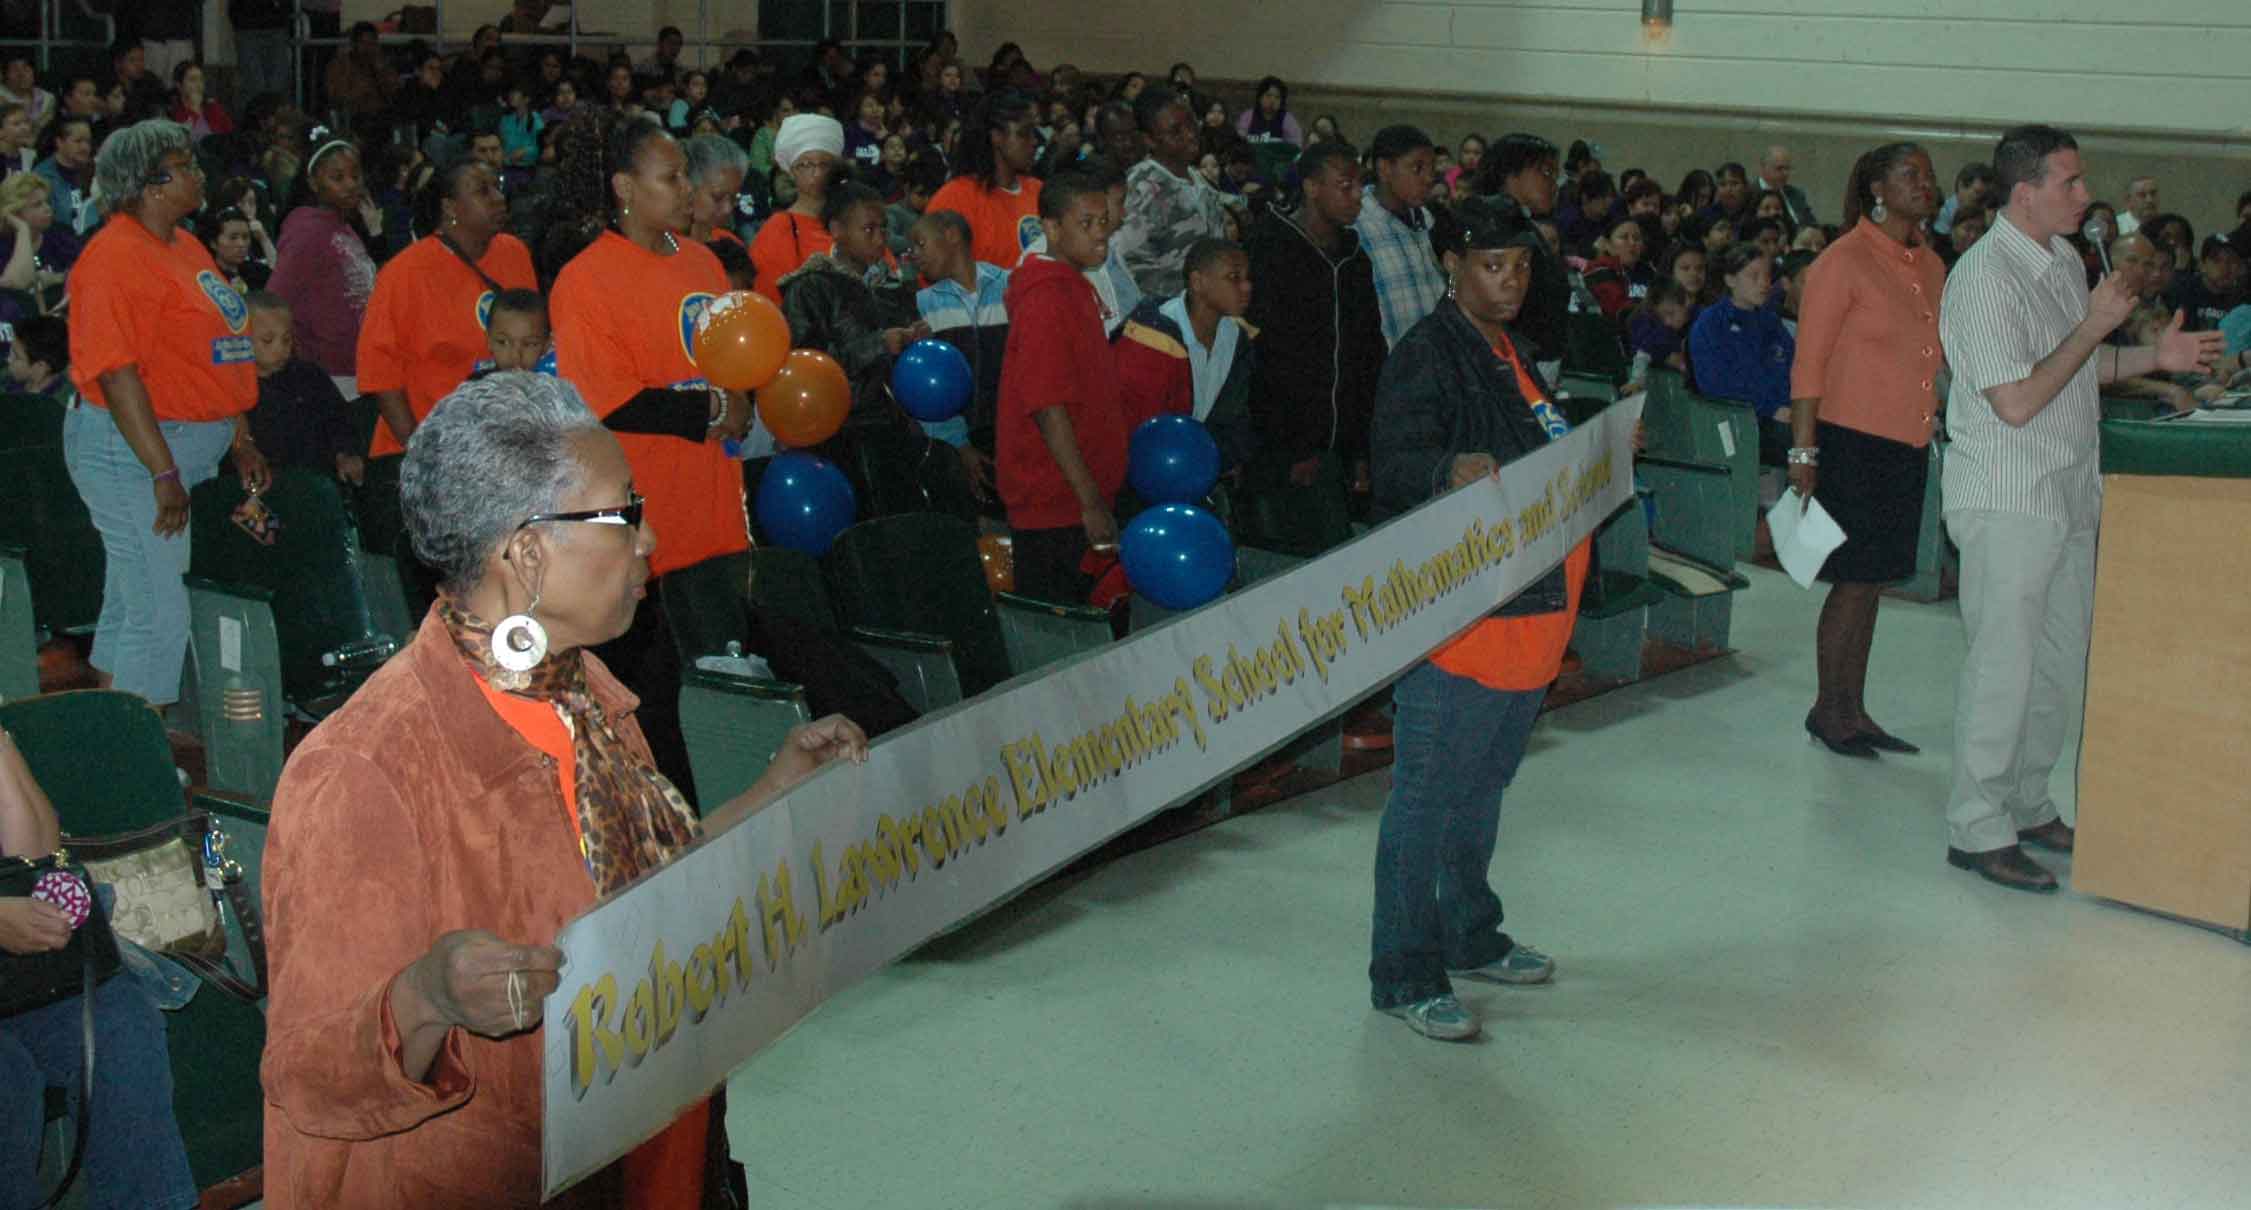 While their engineer Paul Casasanto delivers a detailed outline of the needs of their school (above right, standing with principal McClinton), parents and staff from Robert H. Lawrence Elementary stand during the May 22 hearing at Morgan Park High School. One of the newest trends at Chicago schools is that the school community designs a tee shirt when the school has to present its problems to the Board of Education. On May 22, Gallistel appeared in purple, while Lawrence was in red. Substance photo by George N. Schmidt.